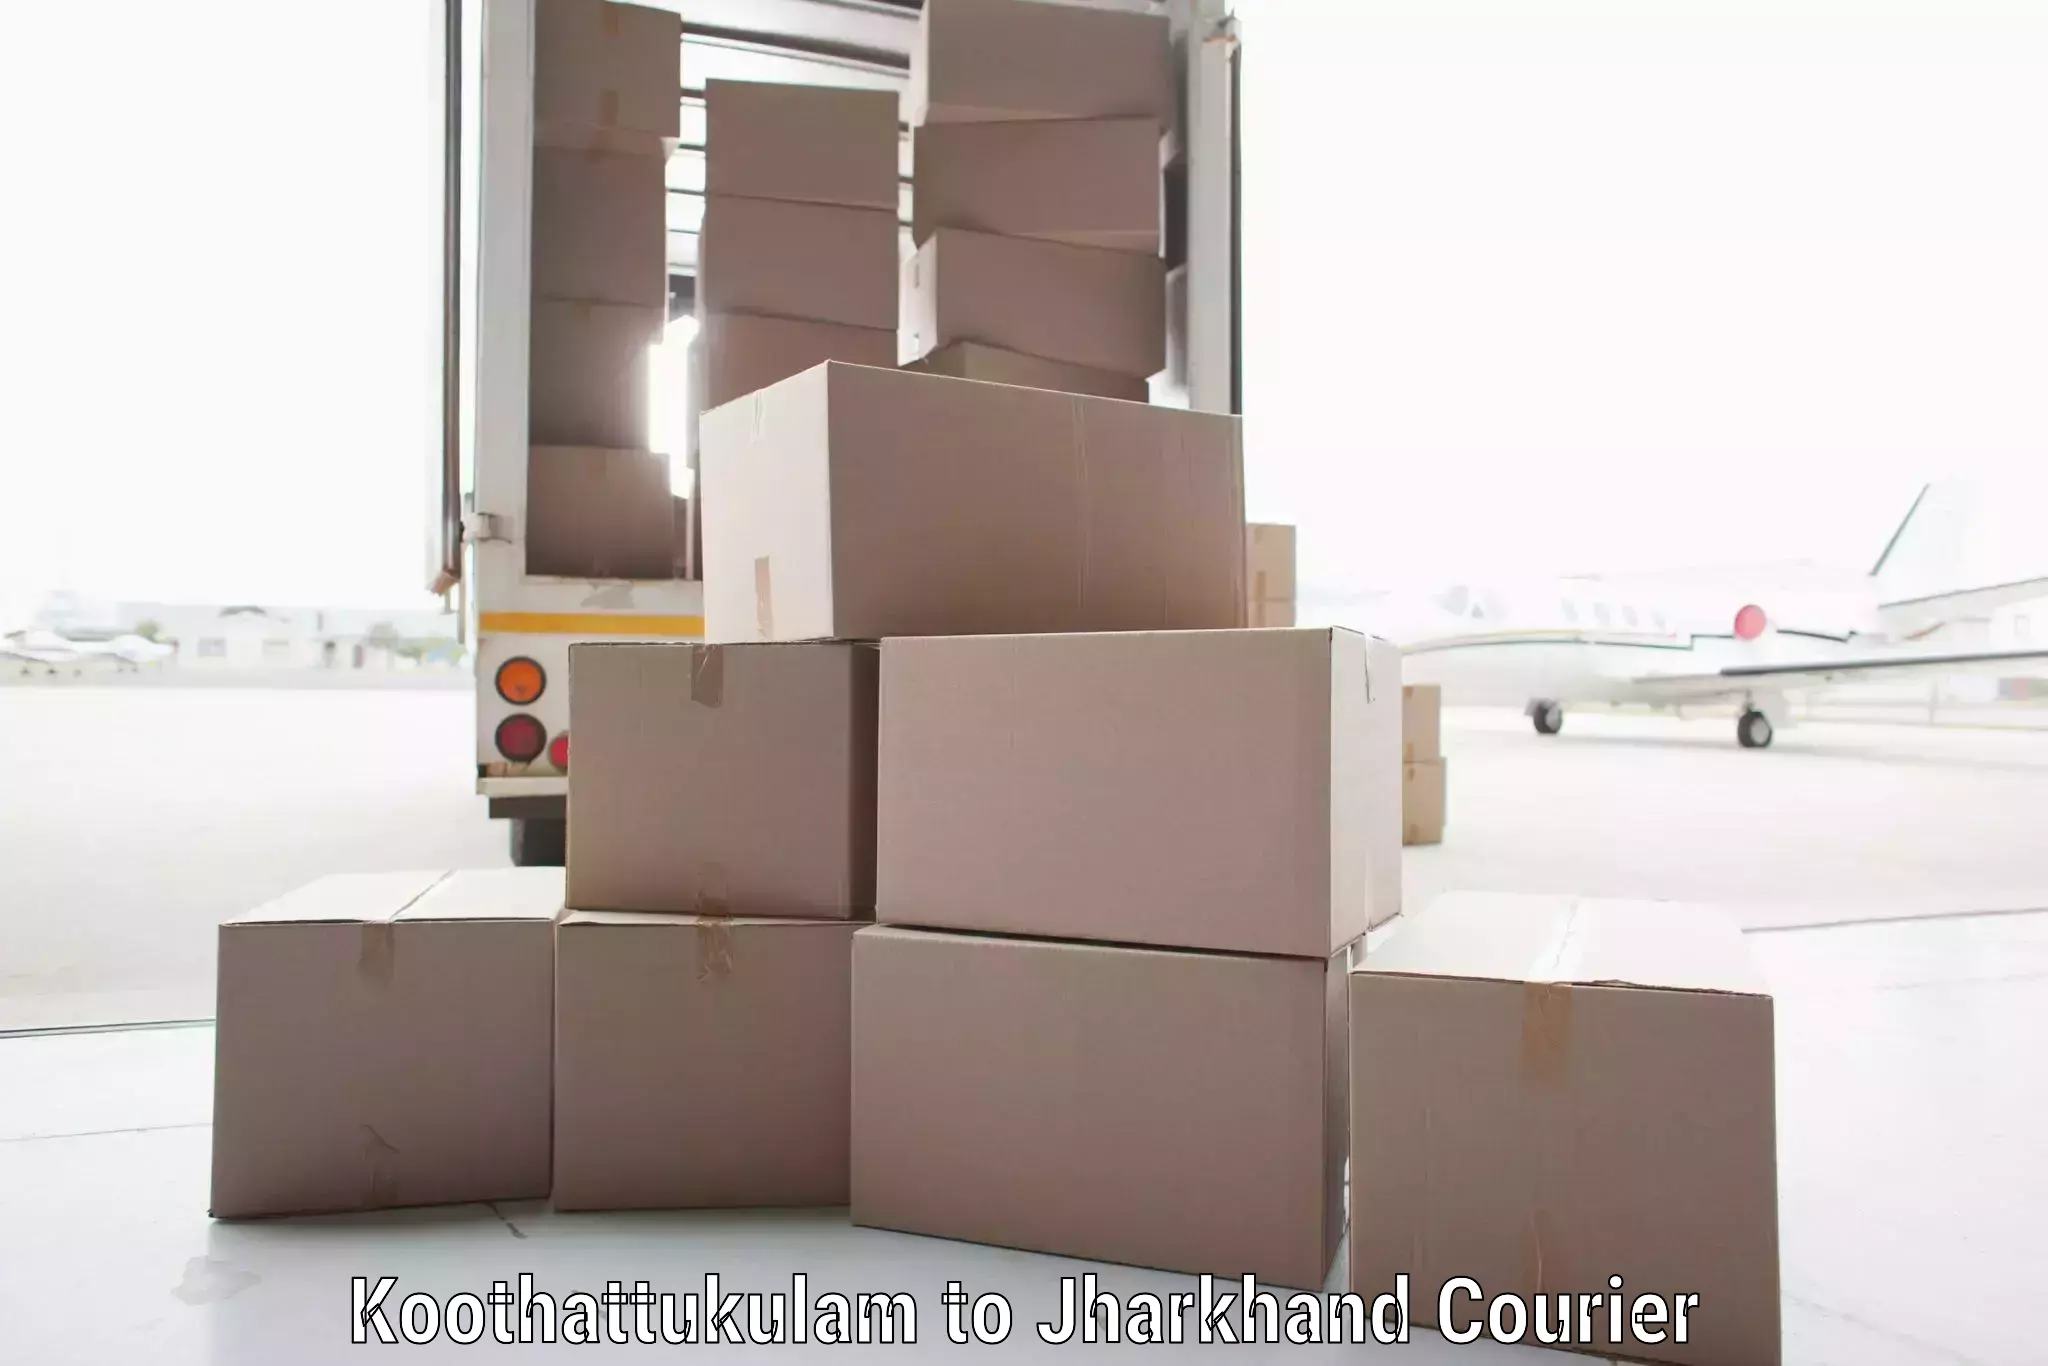 Reliable courier services Koothattukulam to Dhanbad